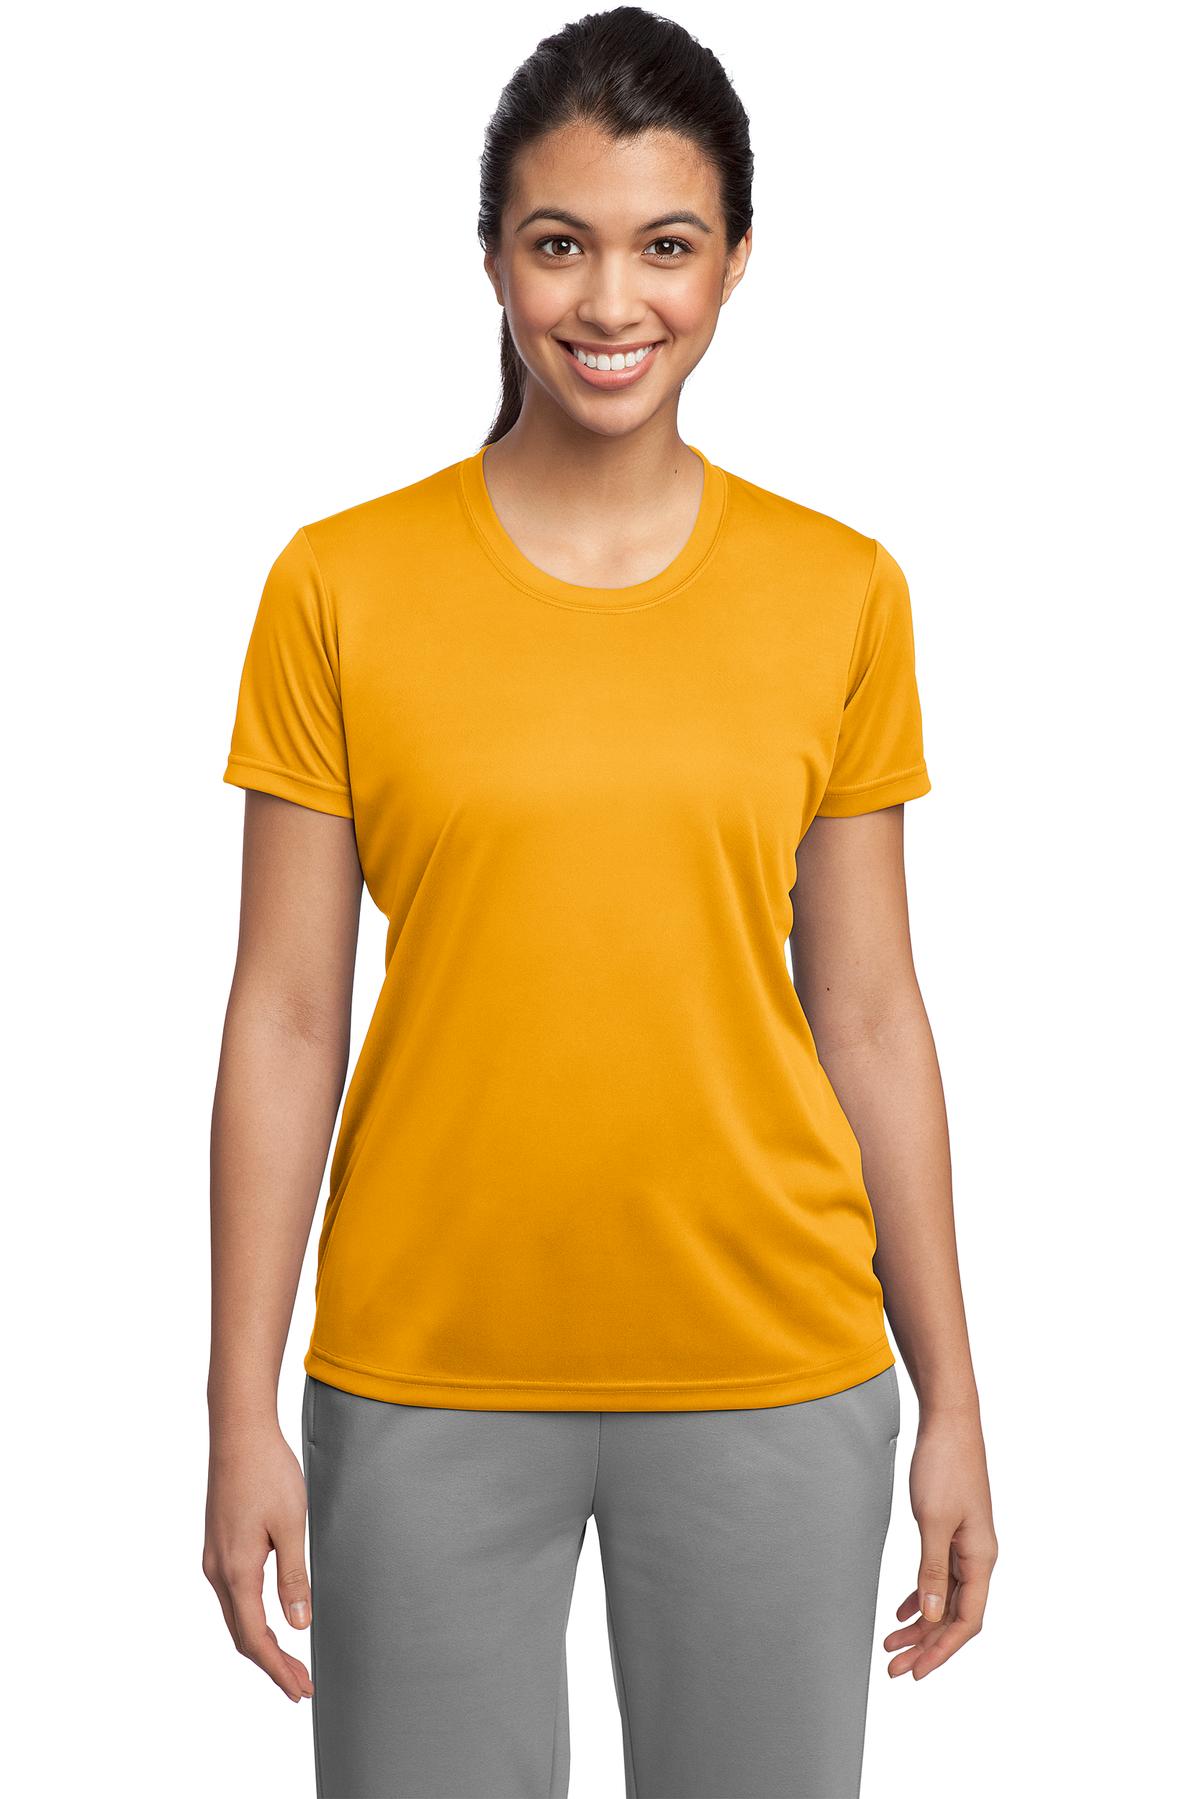 Sport-Tek Ladies PosiCharge Competitor™ V-Neck Tee, Product